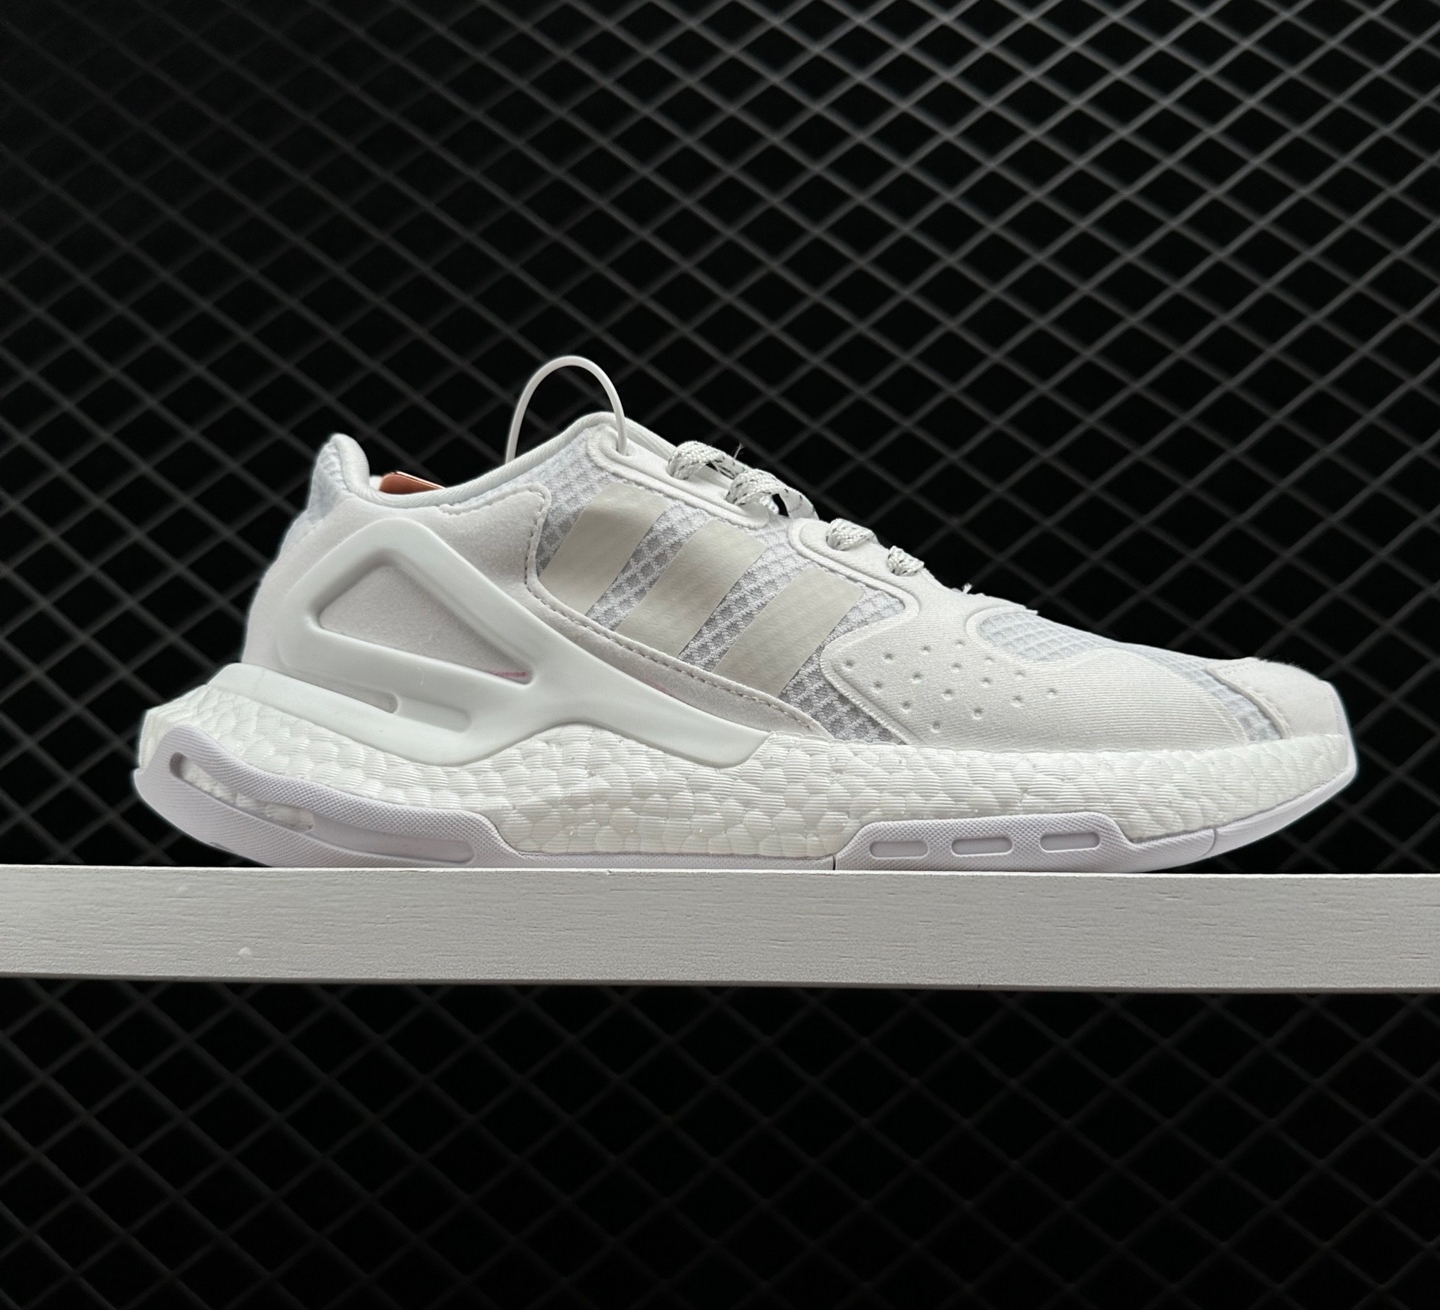 Adidas Day Jogger 2020 Boost Cloud White Running Shoes FW0238 - Shop Now!